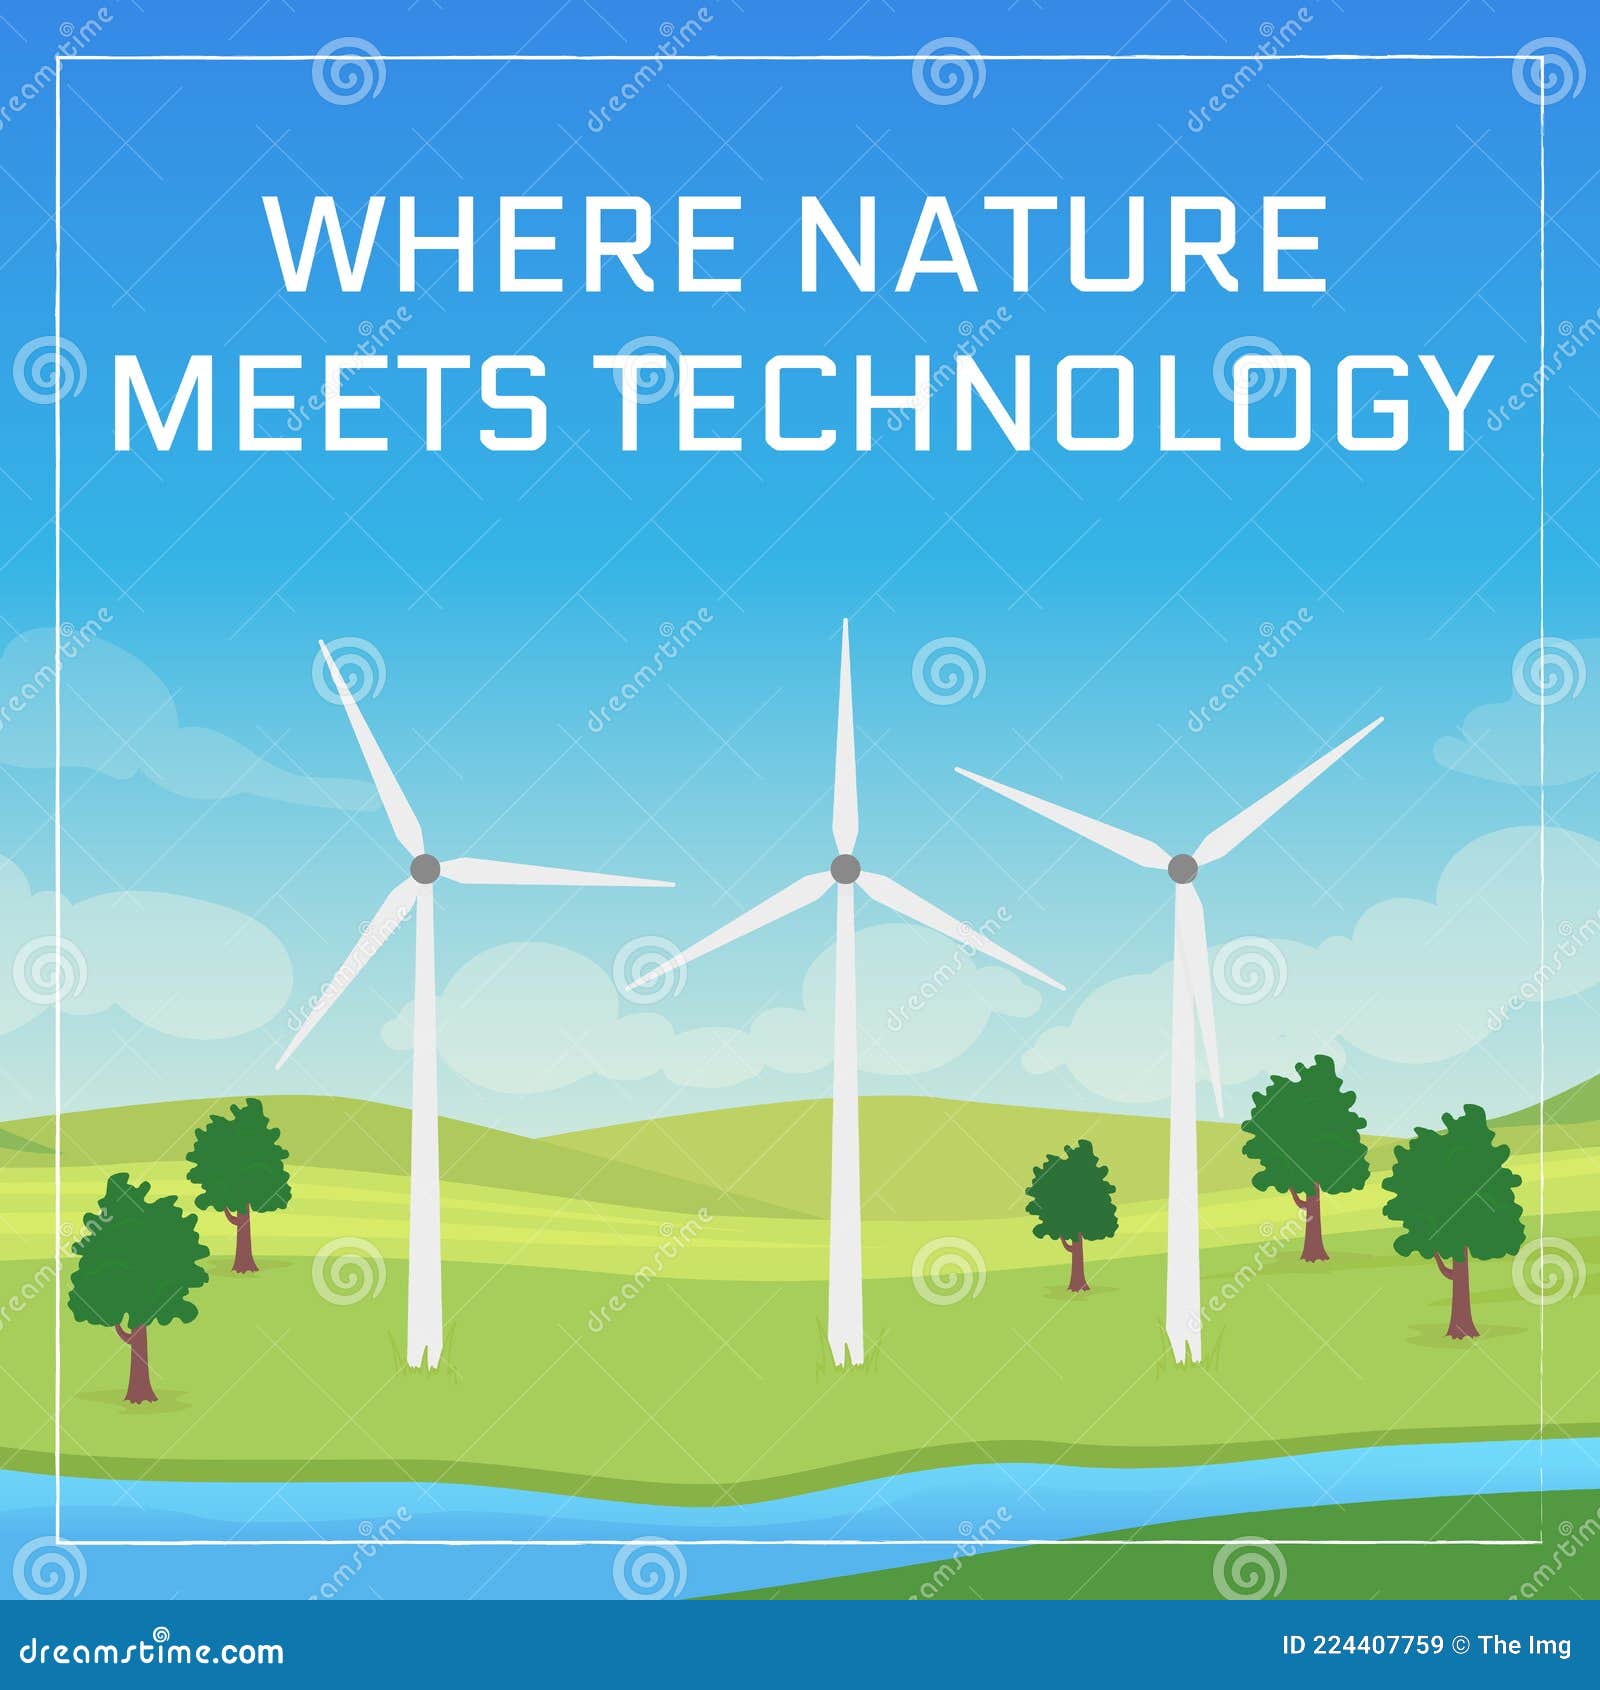 Technology Meets Nature Stock Illustrations – 9 Technology Meets Nature Stock Illustrations, Vectors & - Dreamstime